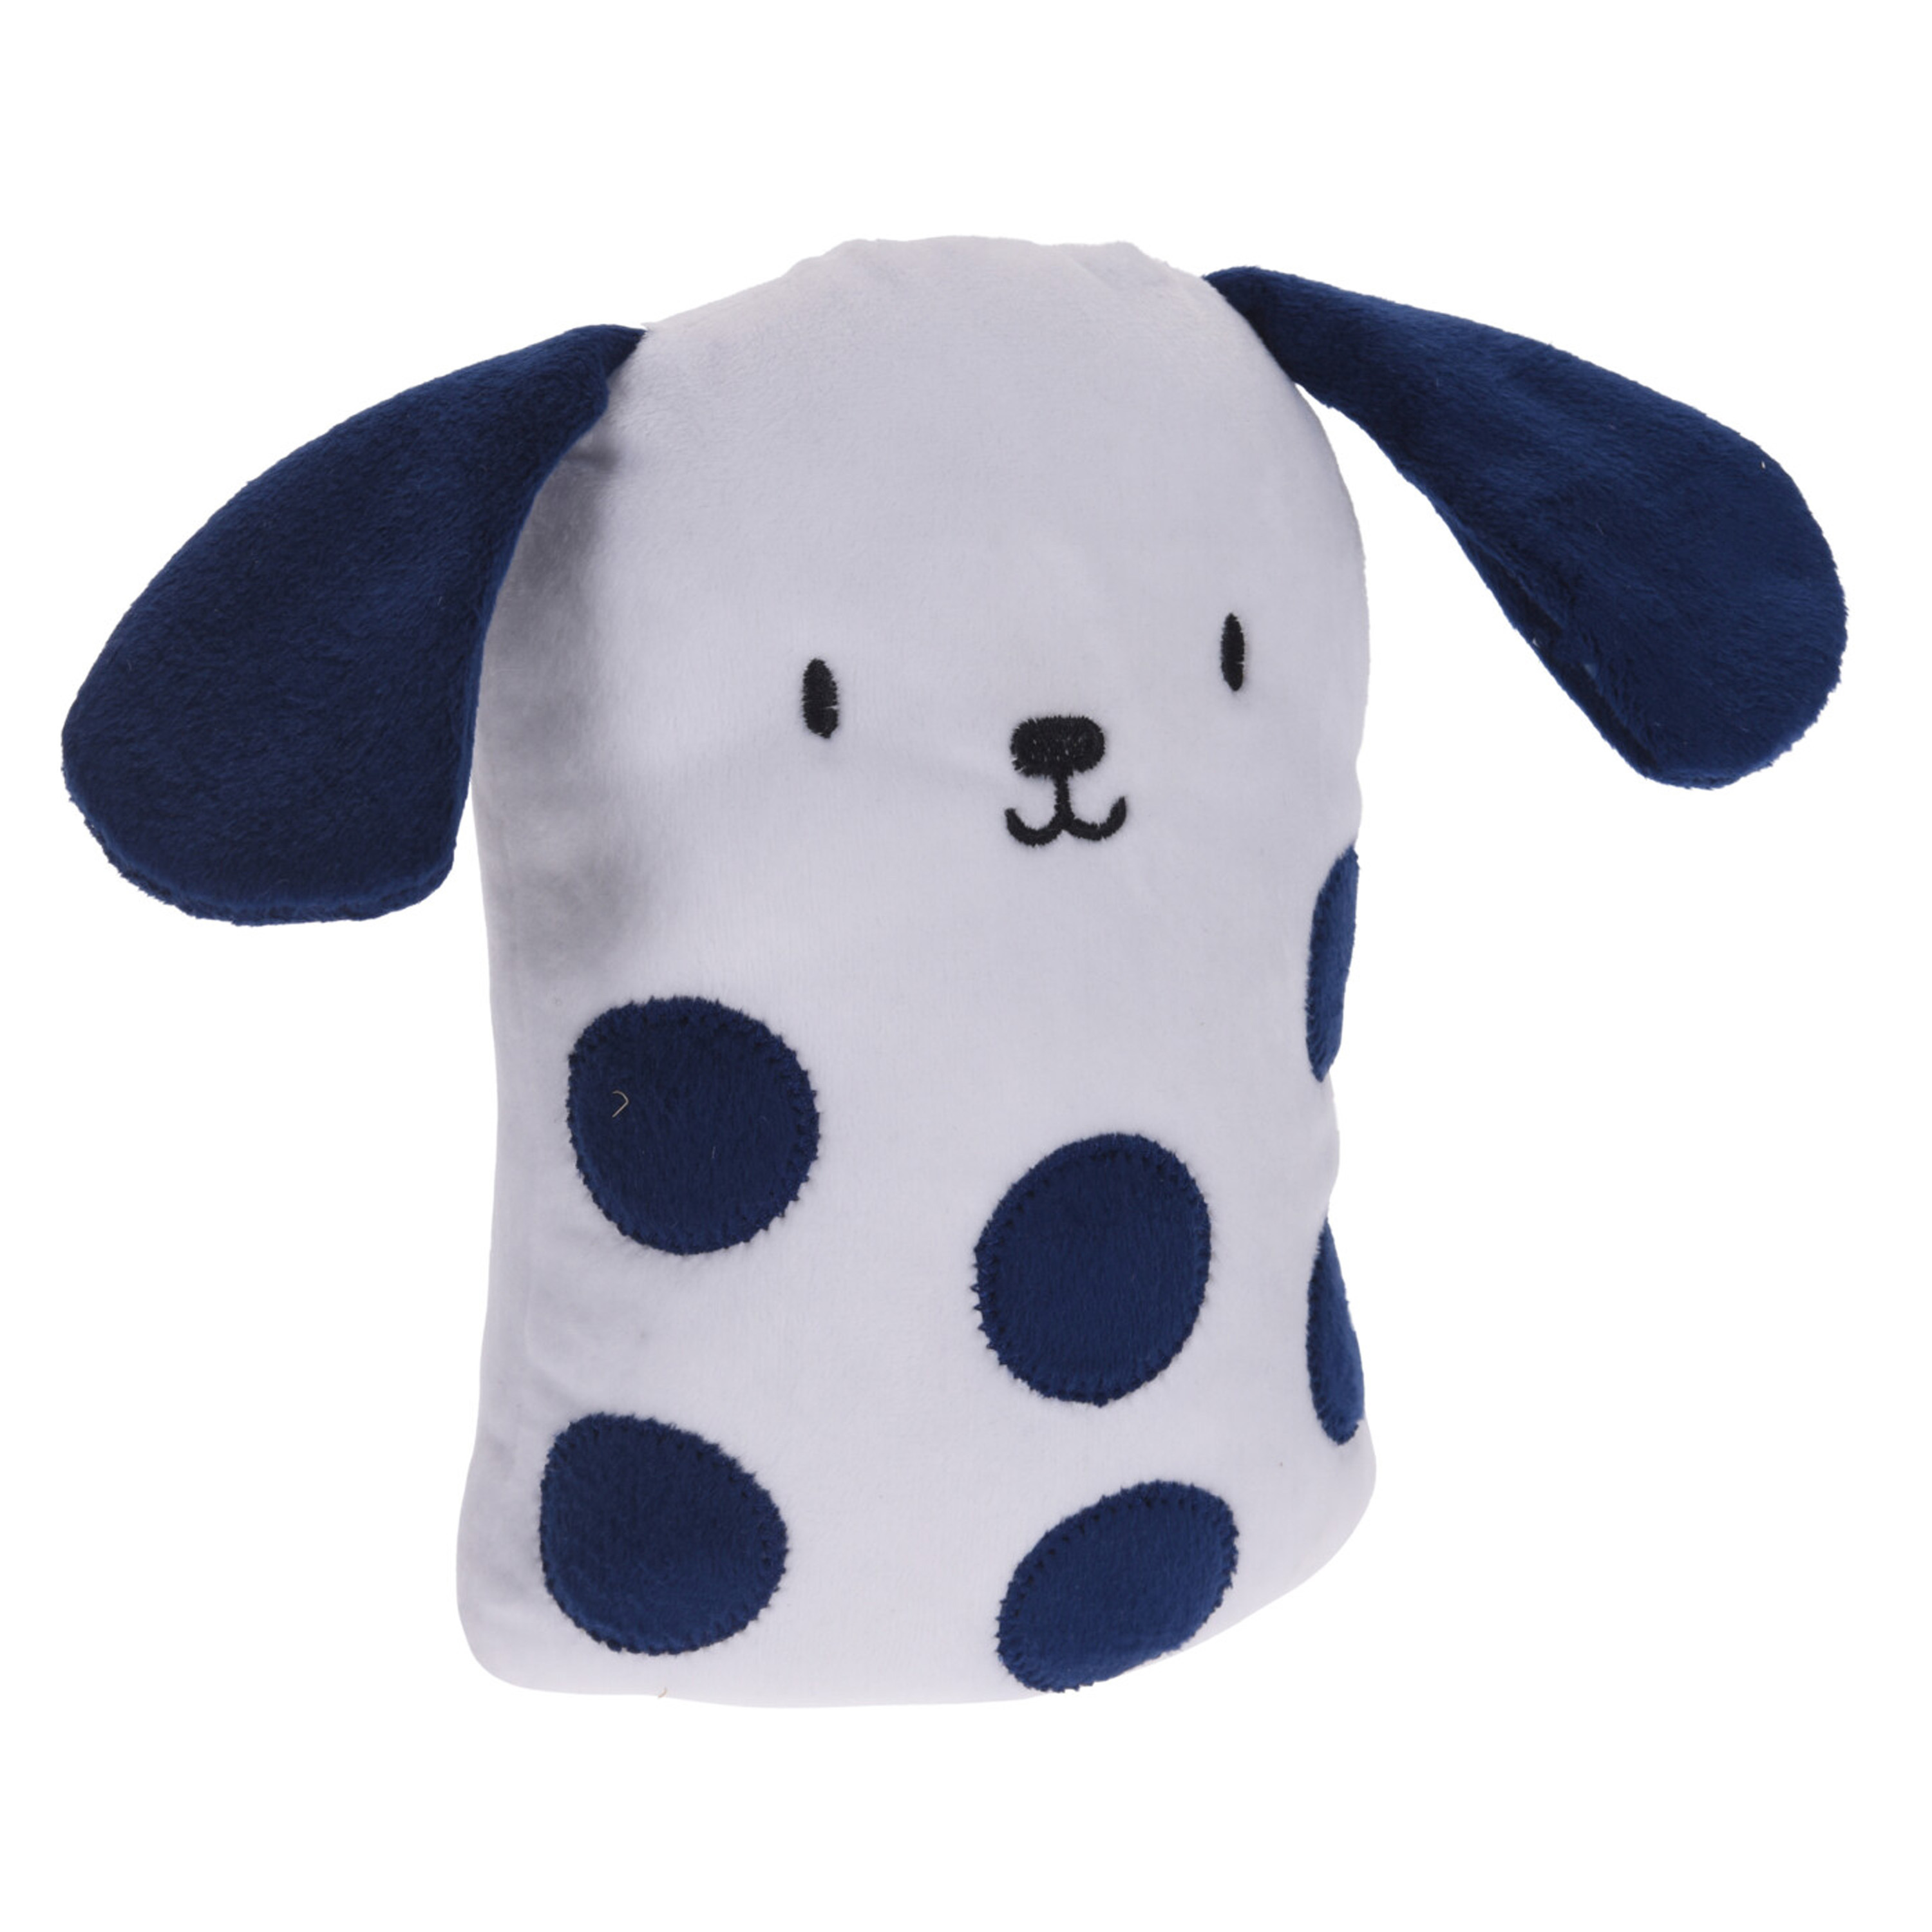 H&S Collection Deurstopper - hond - 15 x 9 x 20 cm - polyester - dieren thema deurstoppers -